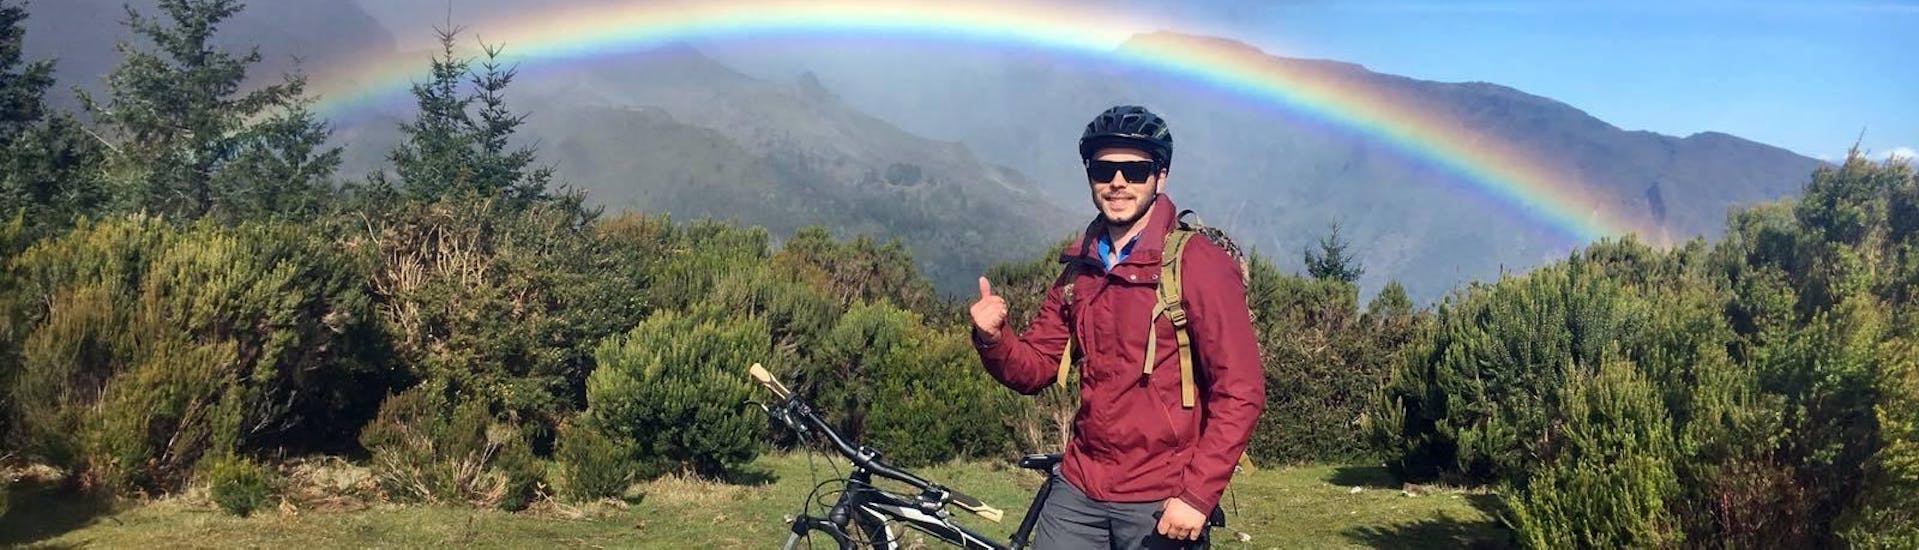 During the Mountain Bike Adventure Ride at Pico do Arieiro organized by Epic Madeira, a participant is stopping to pose for a picture with a rainbow.